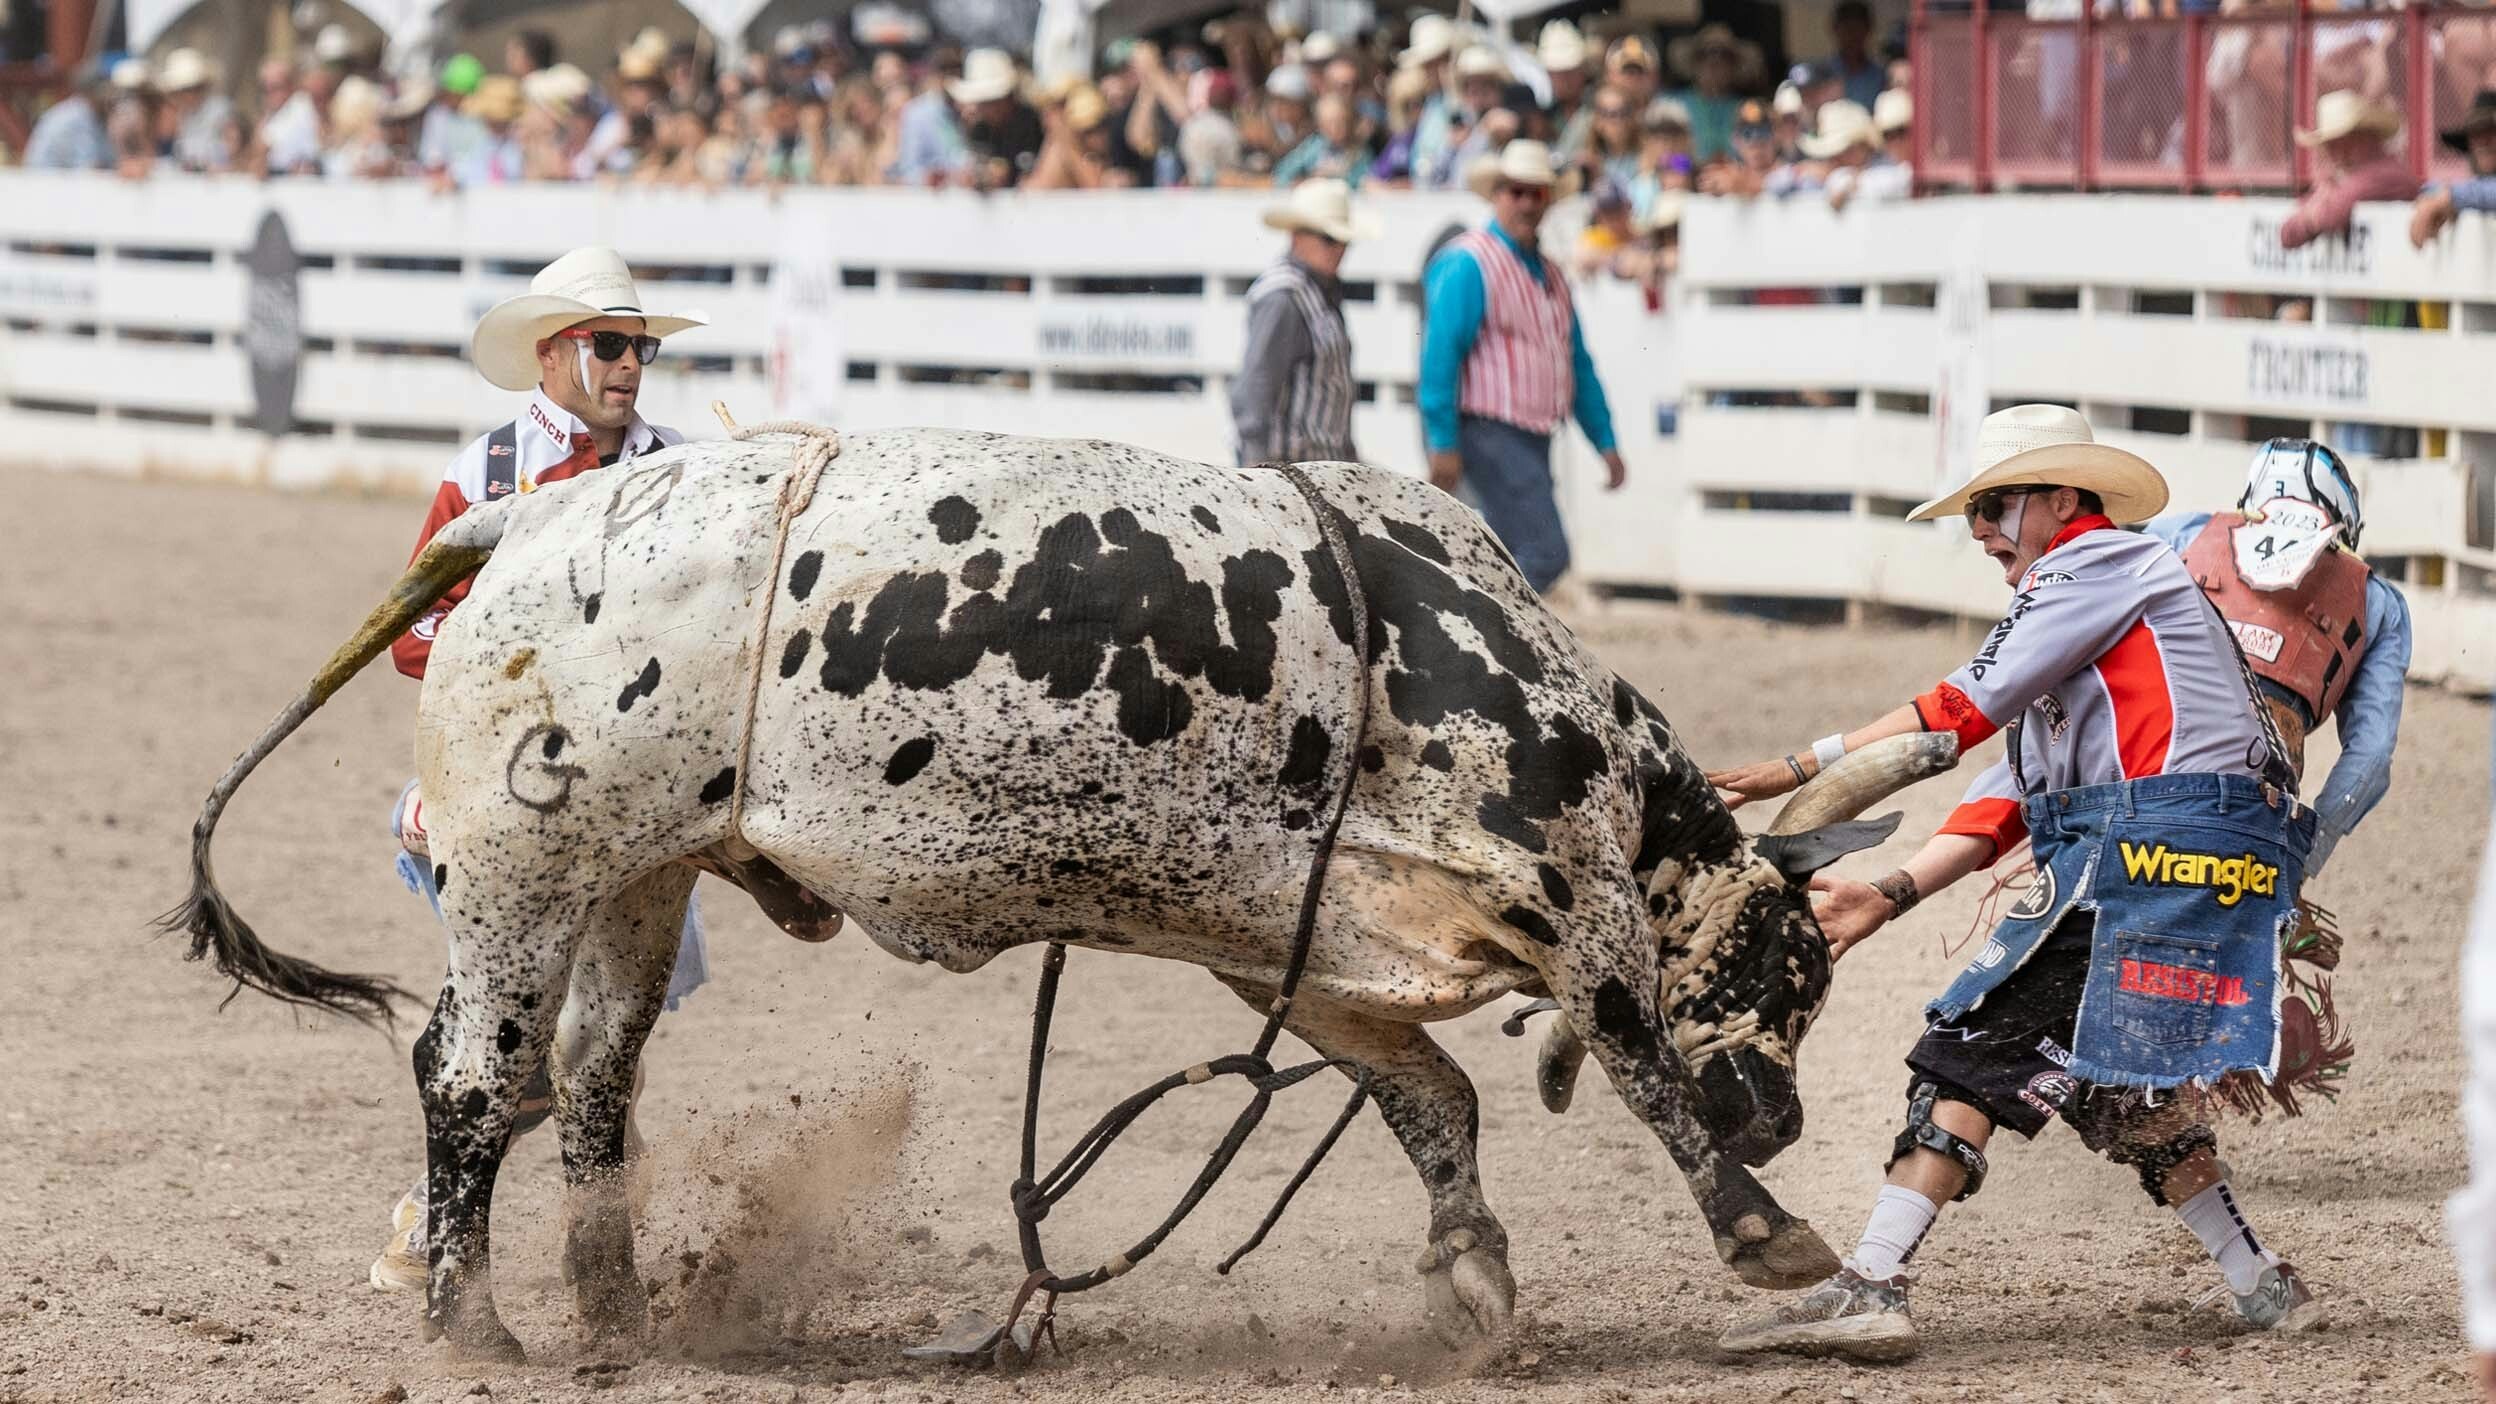 Bullfighters Dusty Tuckness and Cody Webster run into action to protect a bull rider at Cheyenne Frontier Days on July 29, 2023.